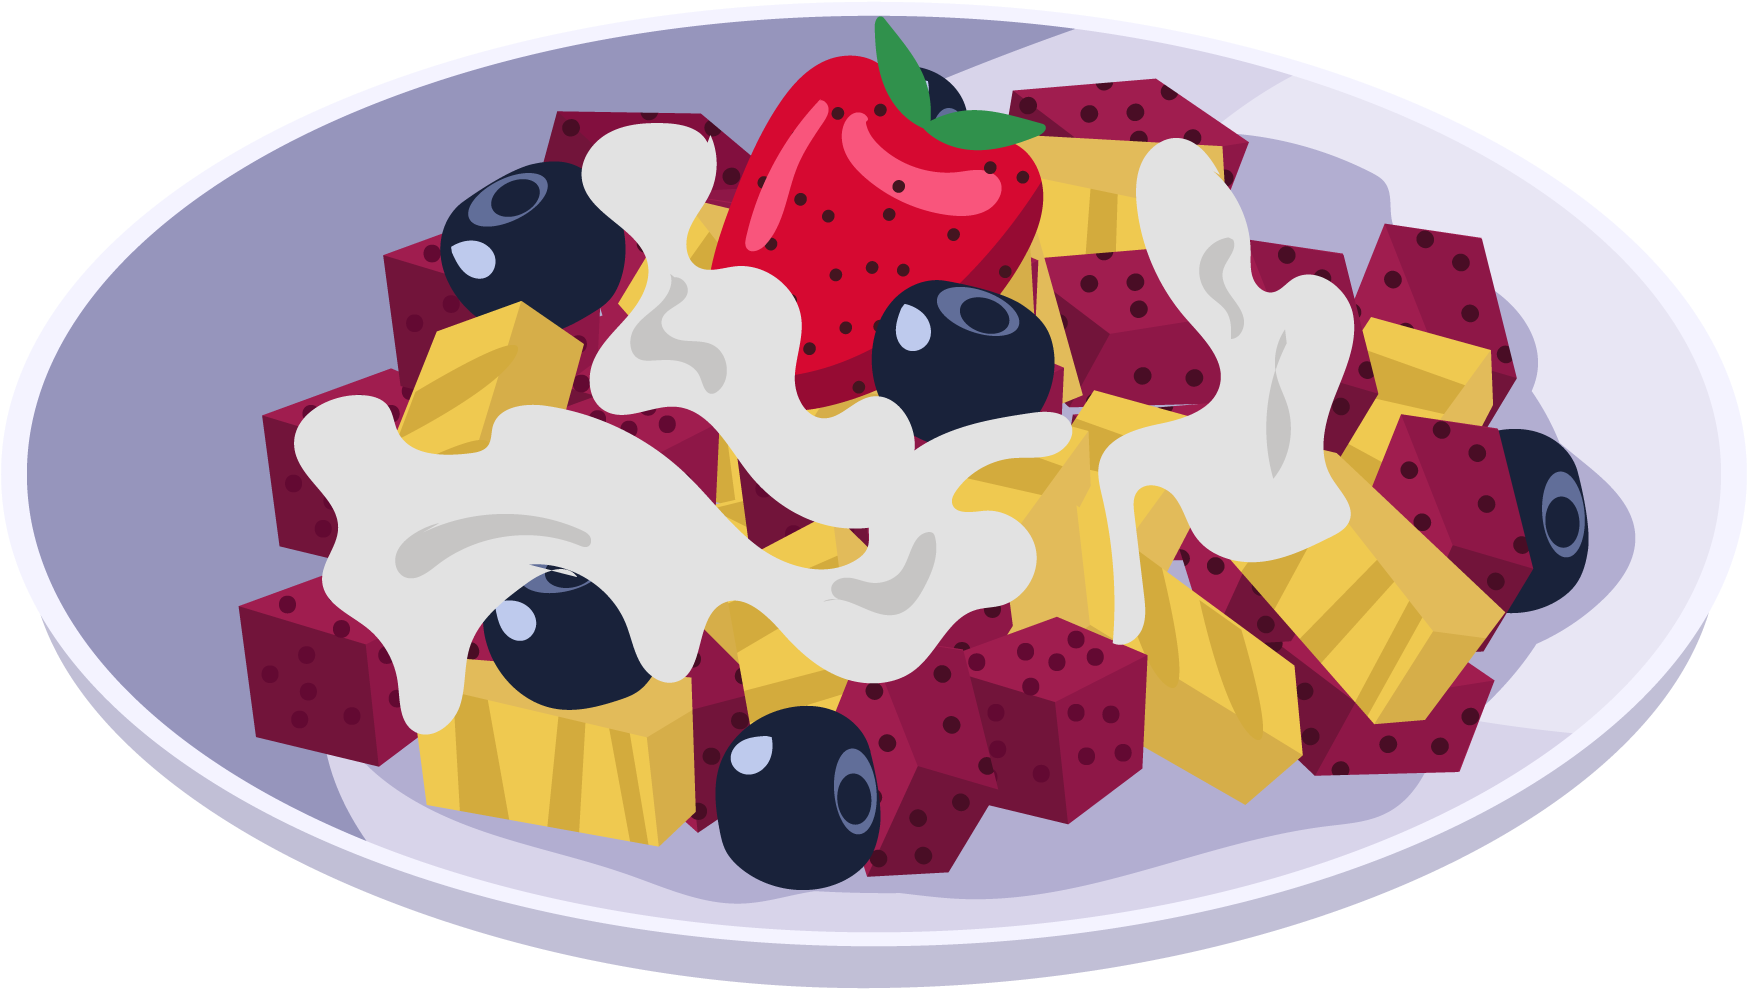 Fruit Blueberry Strawberry Dragon Png And Vector Image - Fruit Salad ...